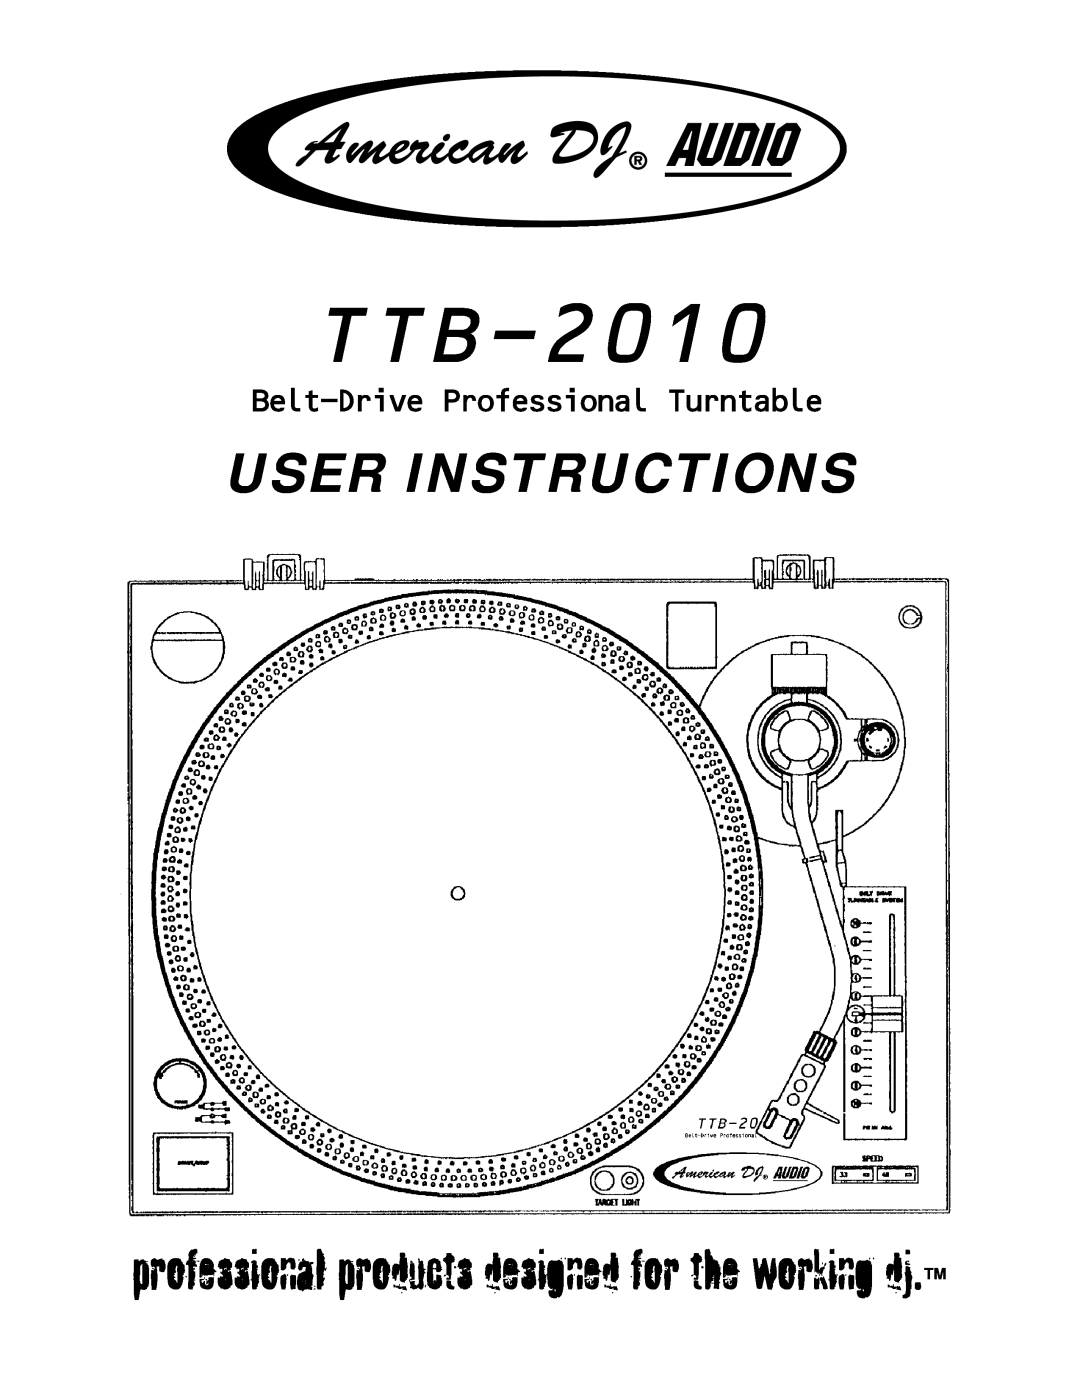 American Audio TTB-2010 manual User Instructions, professional products designed for the working dj 